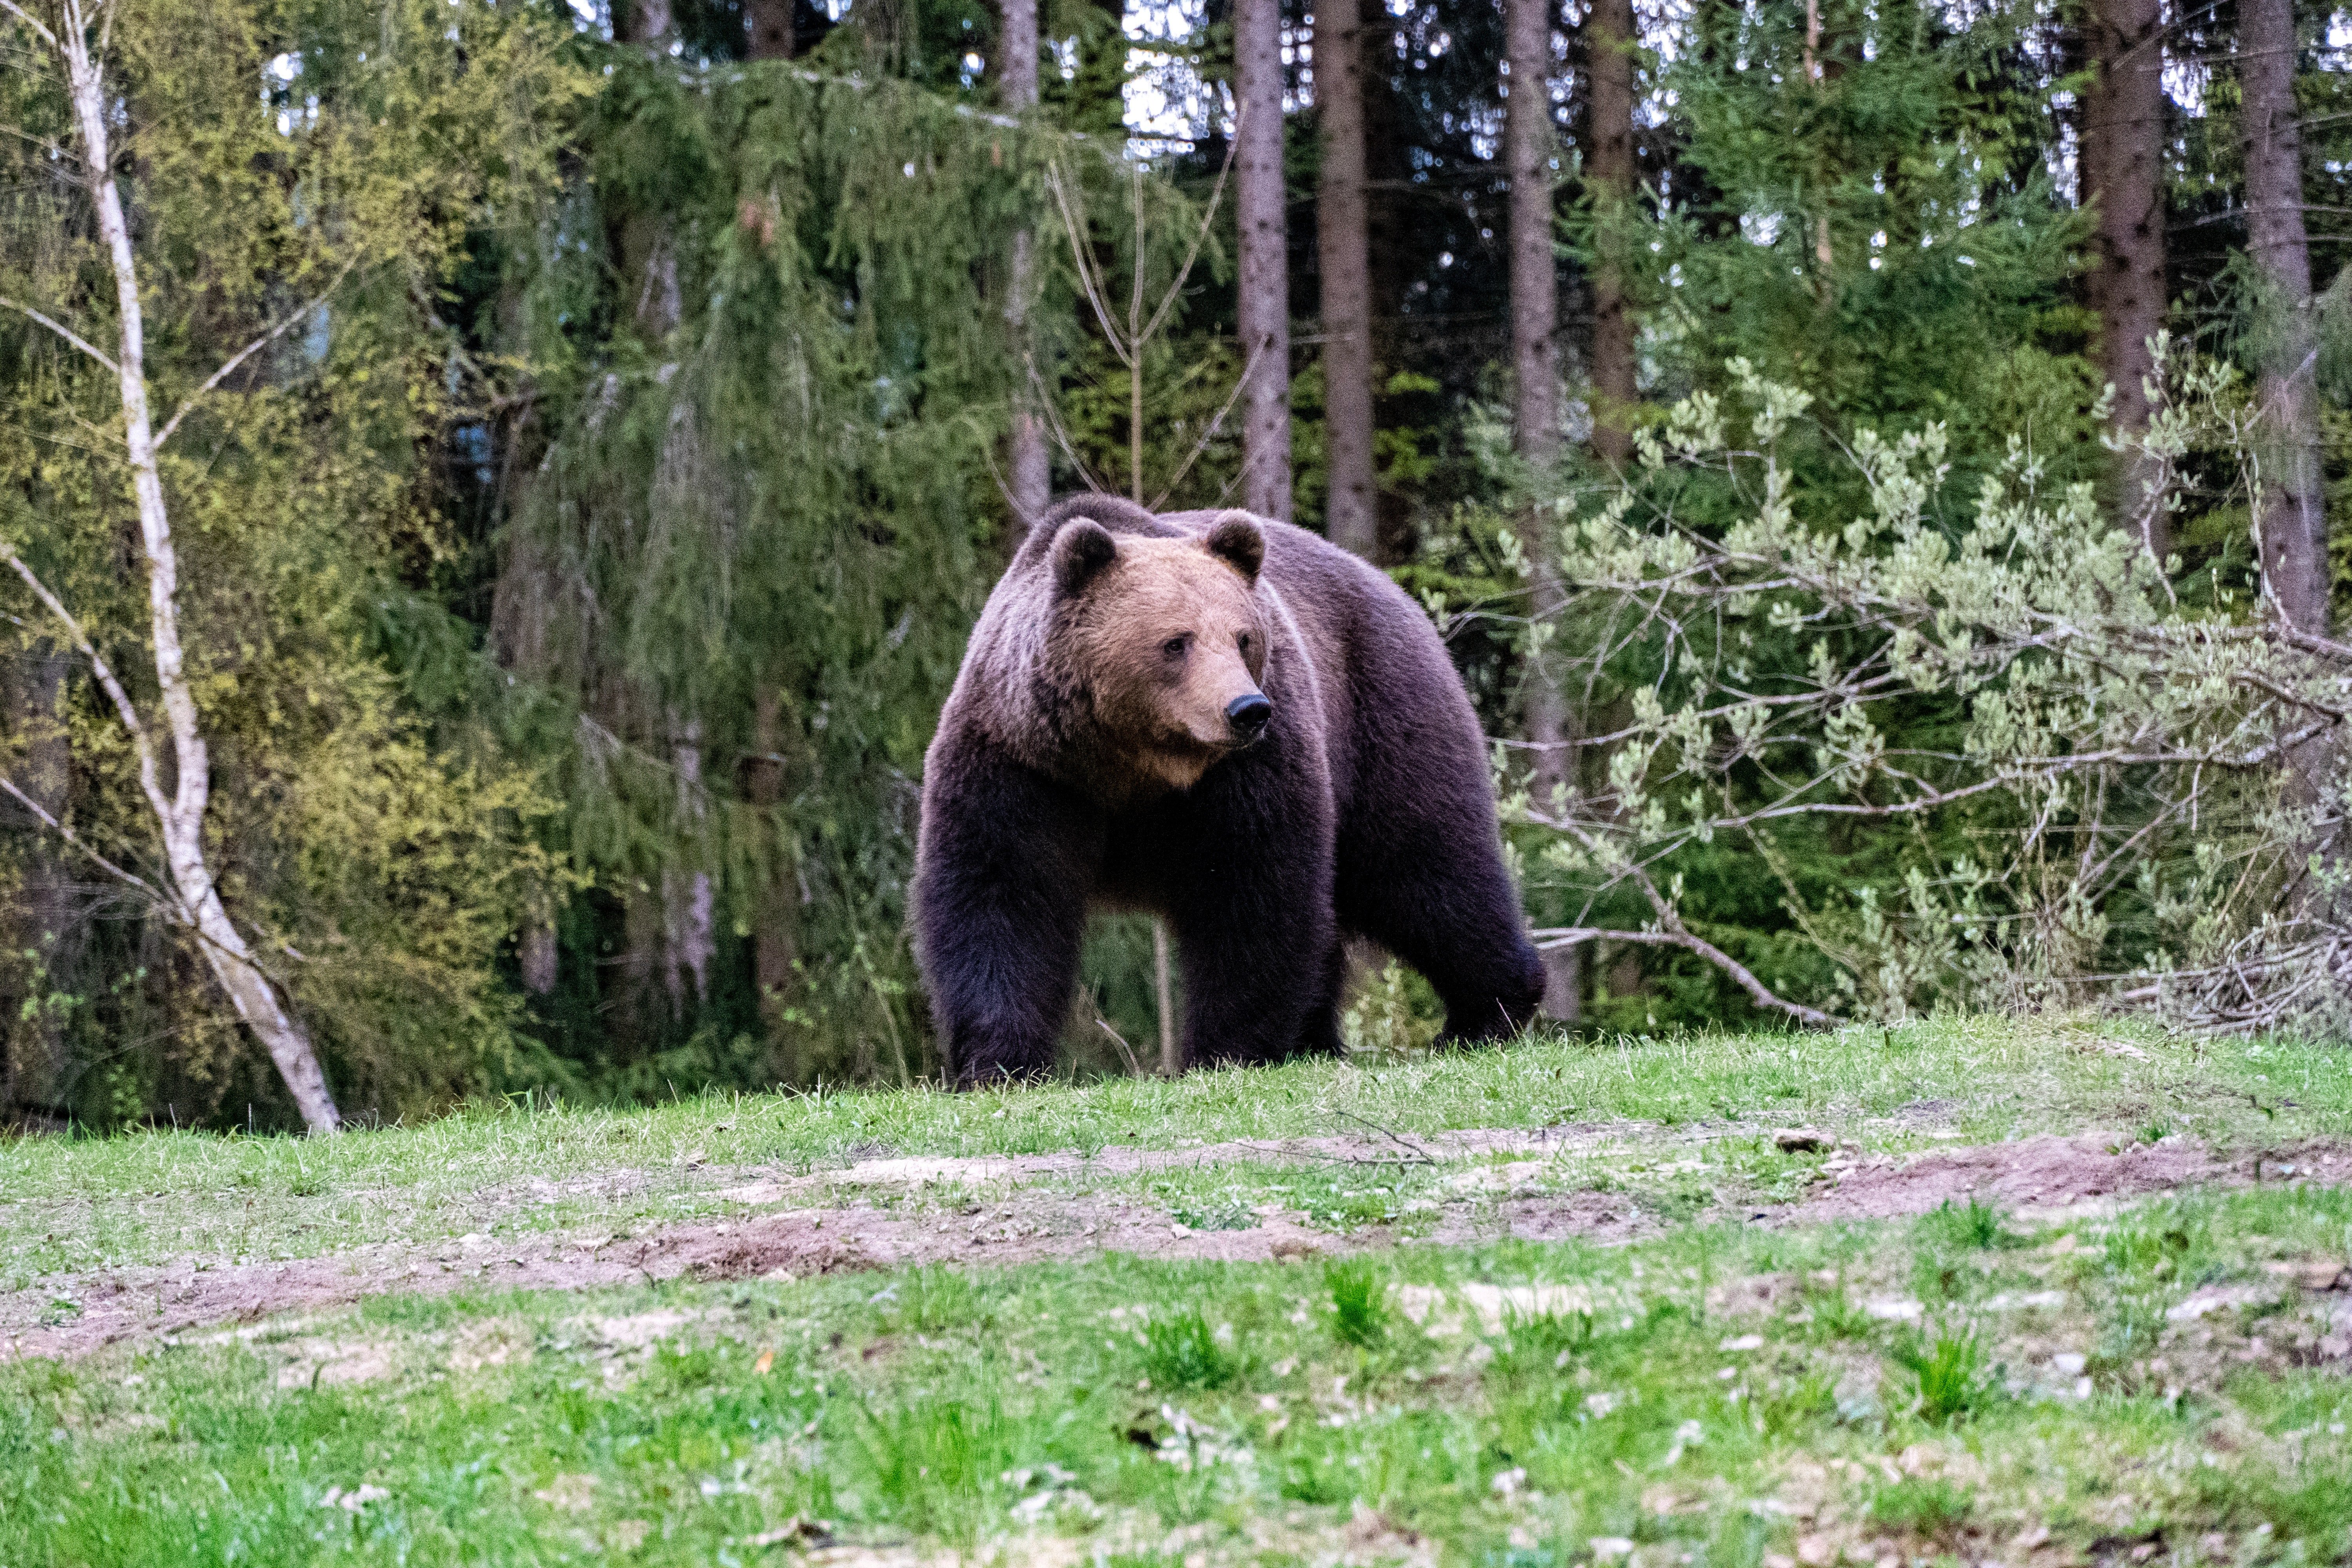 A grizzly bear walks in between a lane of trees | Photo: Pexels/Ibrahim ALbrdawil 